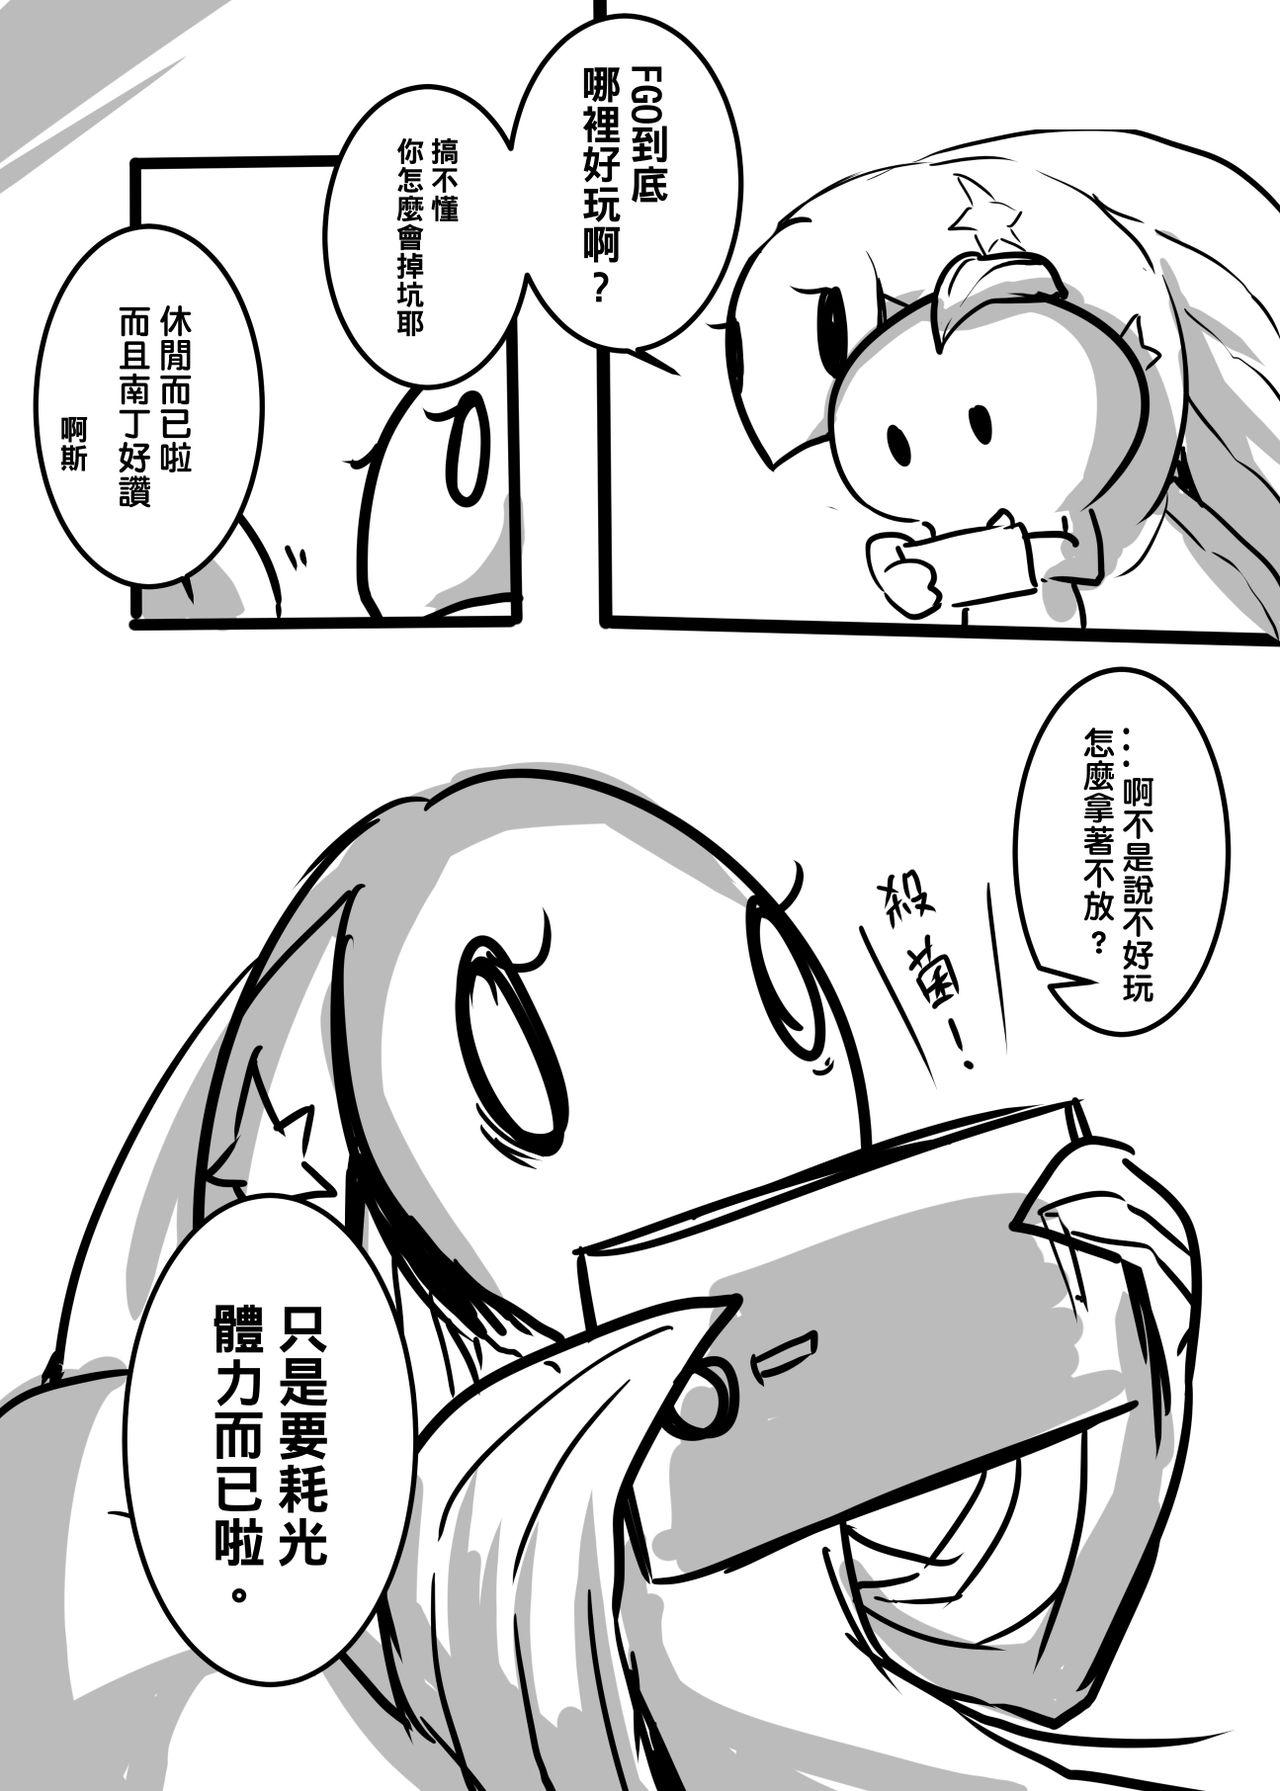 Buceta 高燃費BODY - Fate grand order Exhibitionist - Page 15